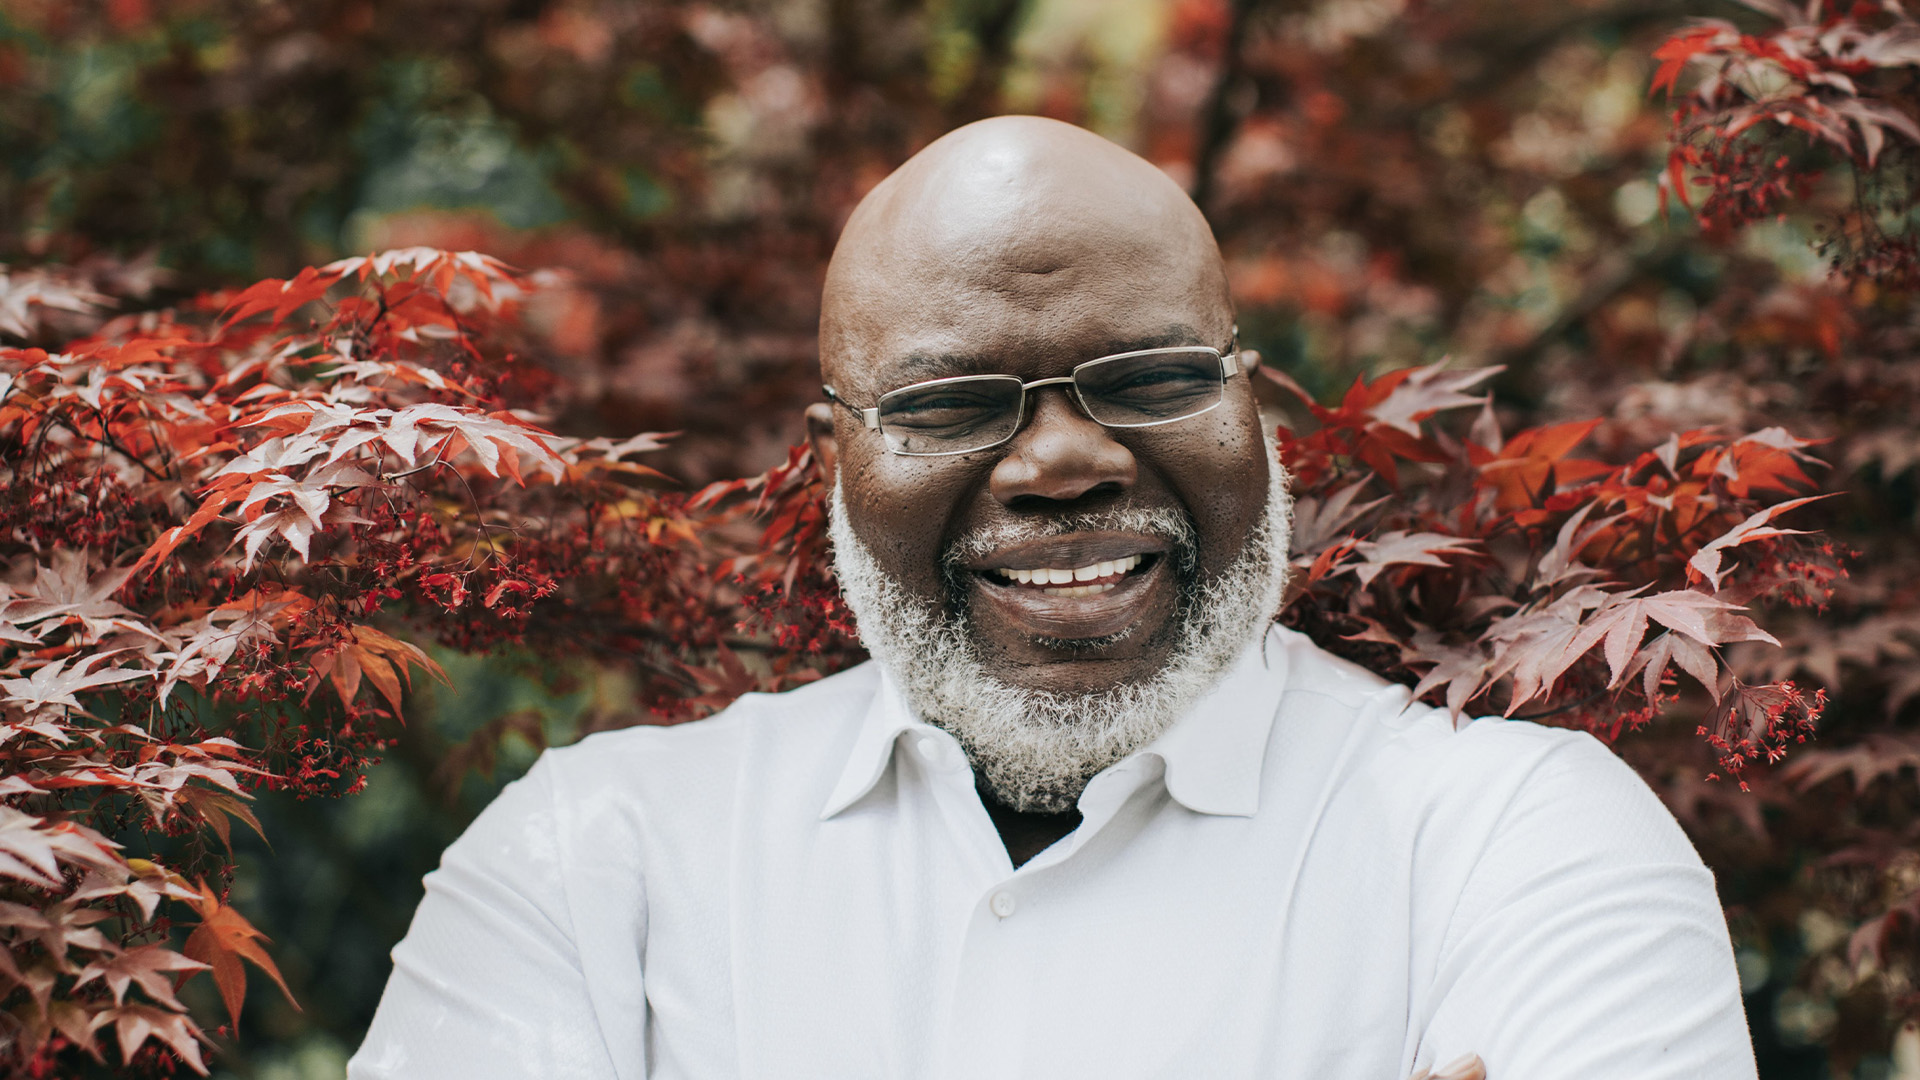 T.D. Jakes Real Estate Ventures Joins Miami's Largest Black-Owned Real Estate Developer To Build Affordable Housing In South Florida